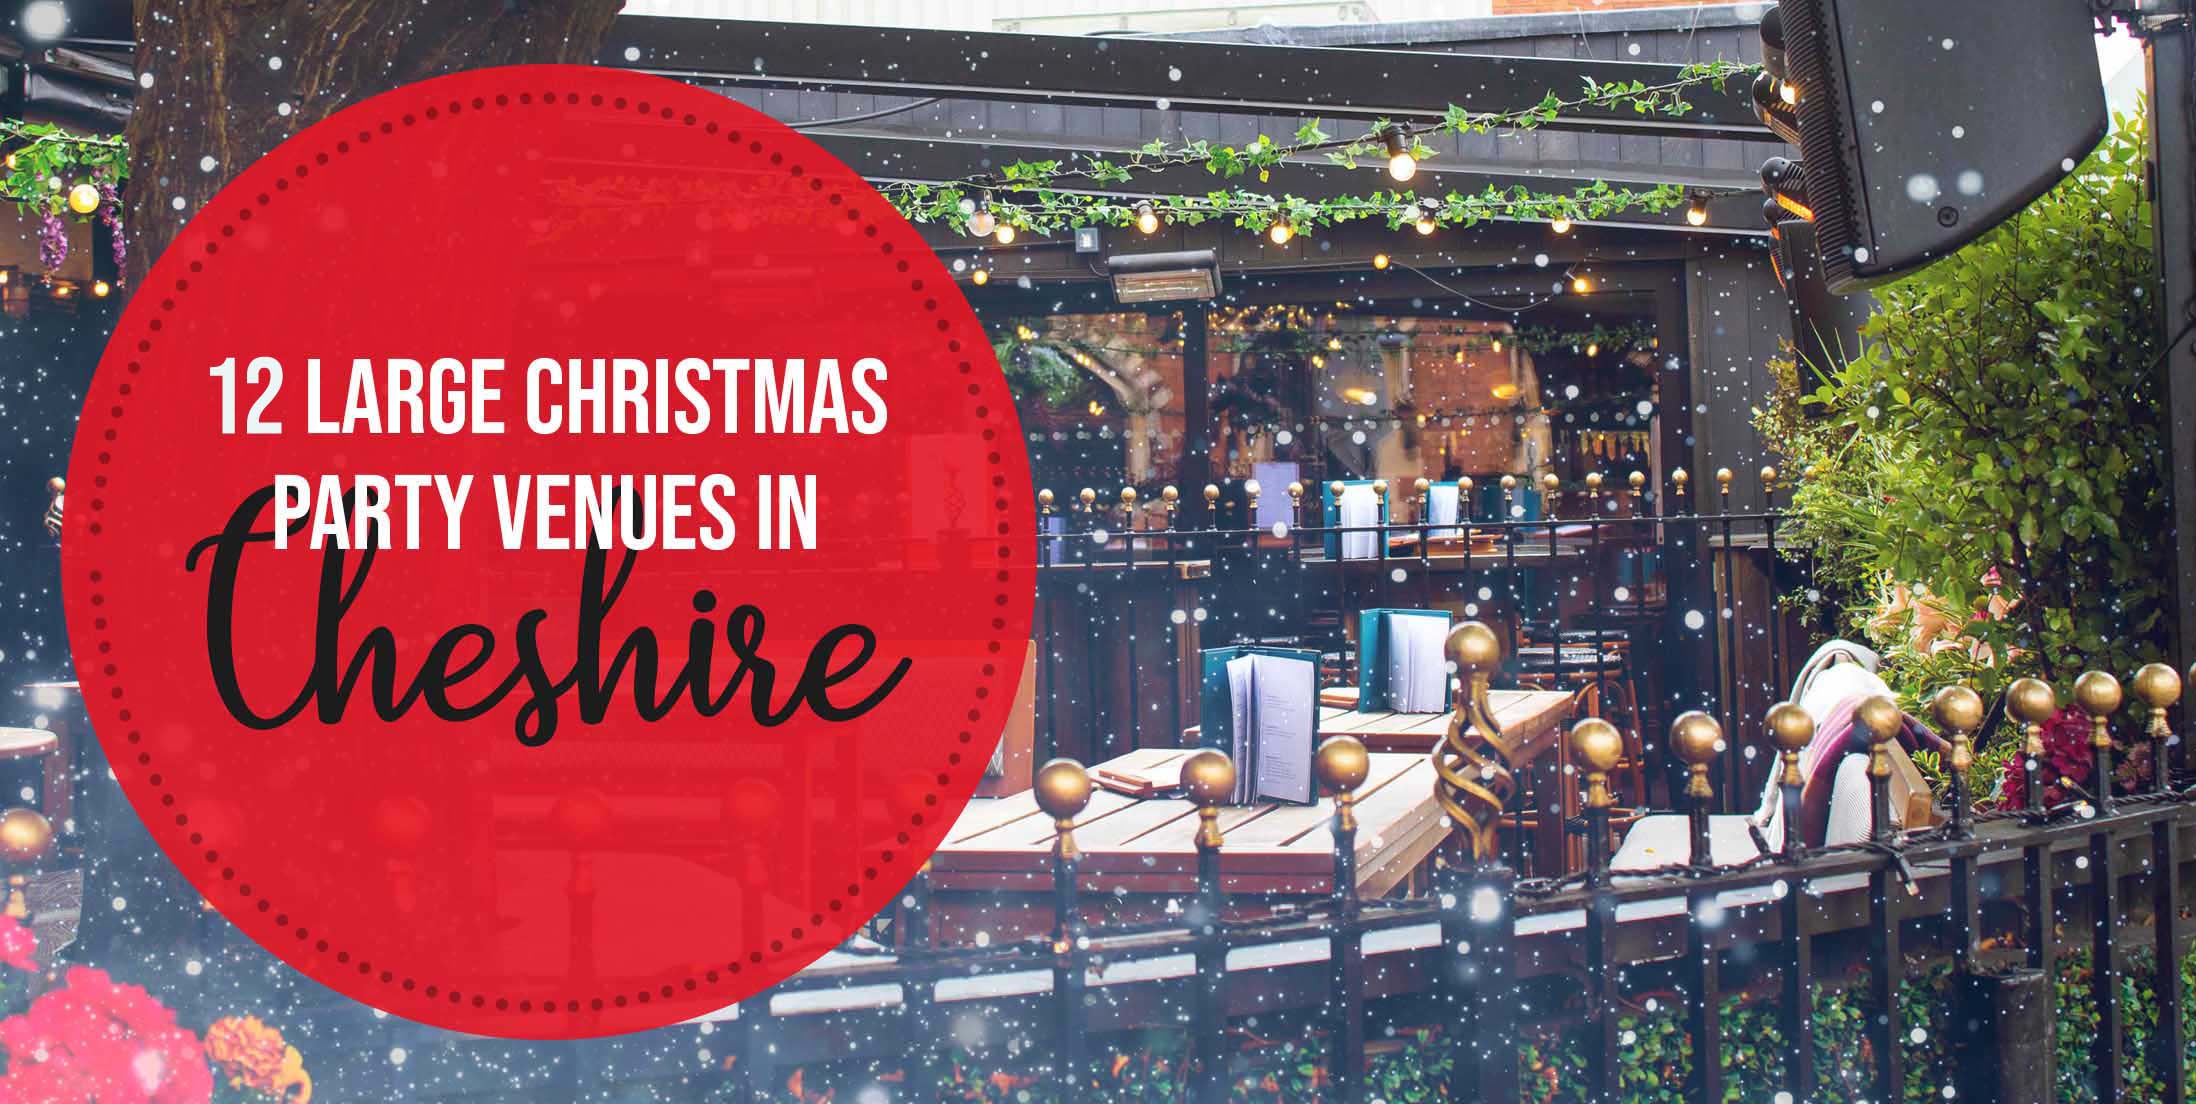 10 Large Christmas Party Venues in Cheshire